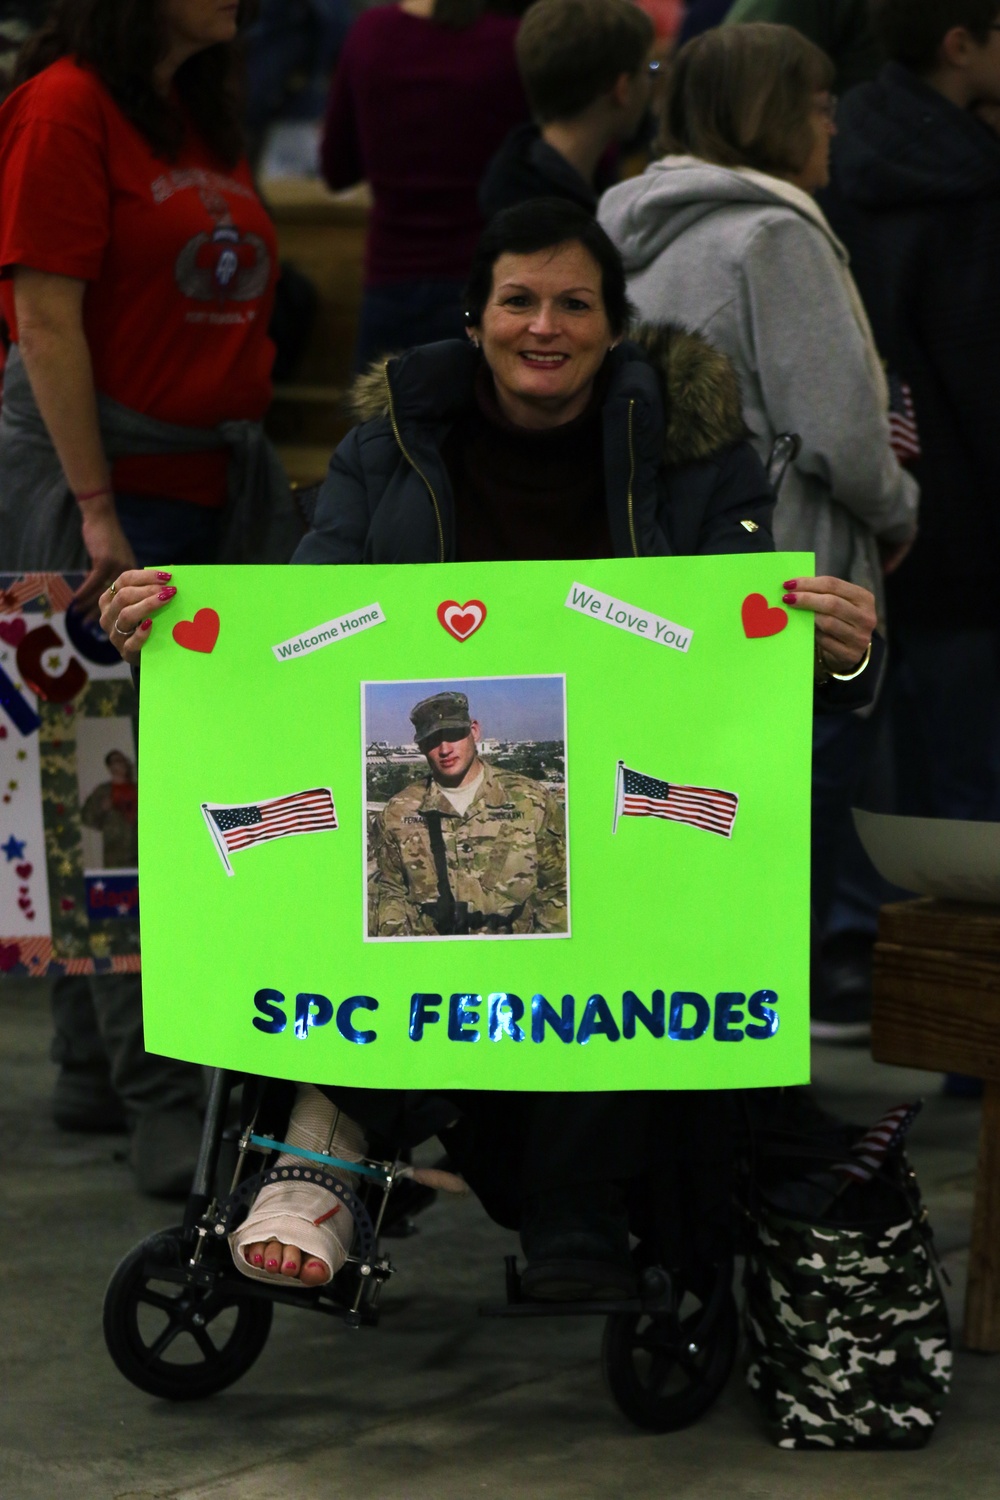 82nd Airborne Division paratroopers return home